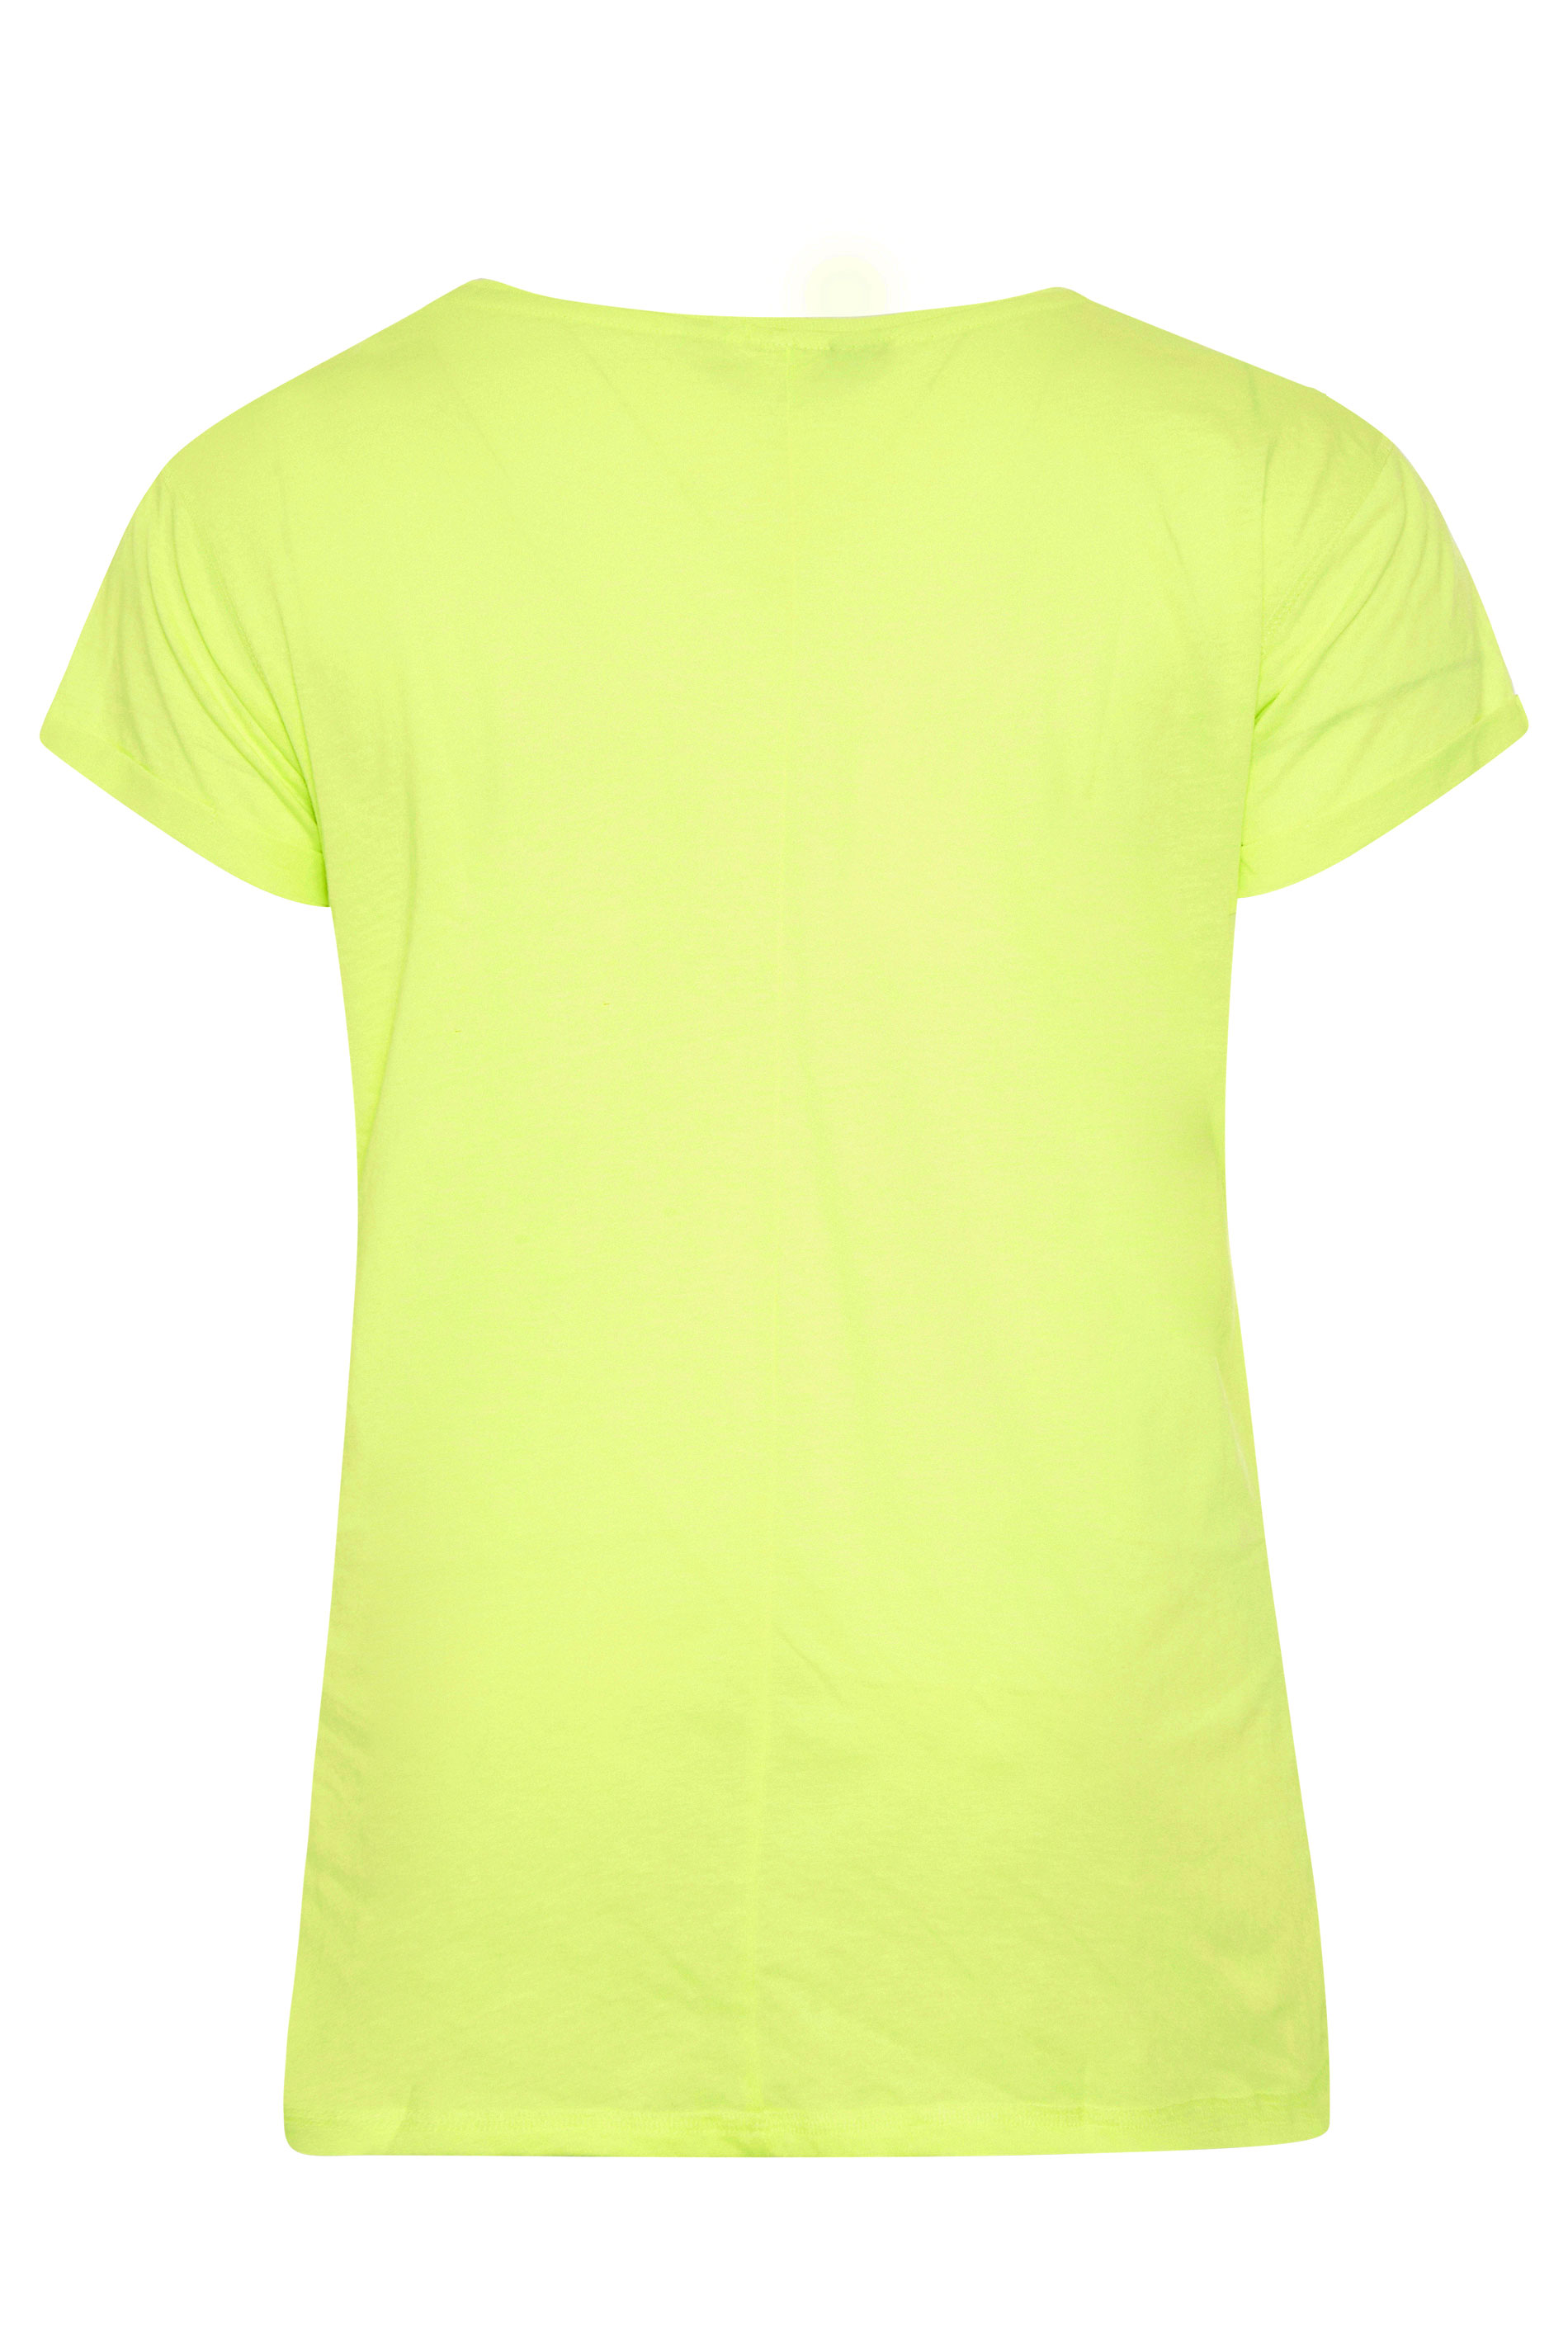 Grande taille  Tops Grande taille  T-Shirts | T-Shirt Vert Fluo Manches Courtes en Jersey - PS78686